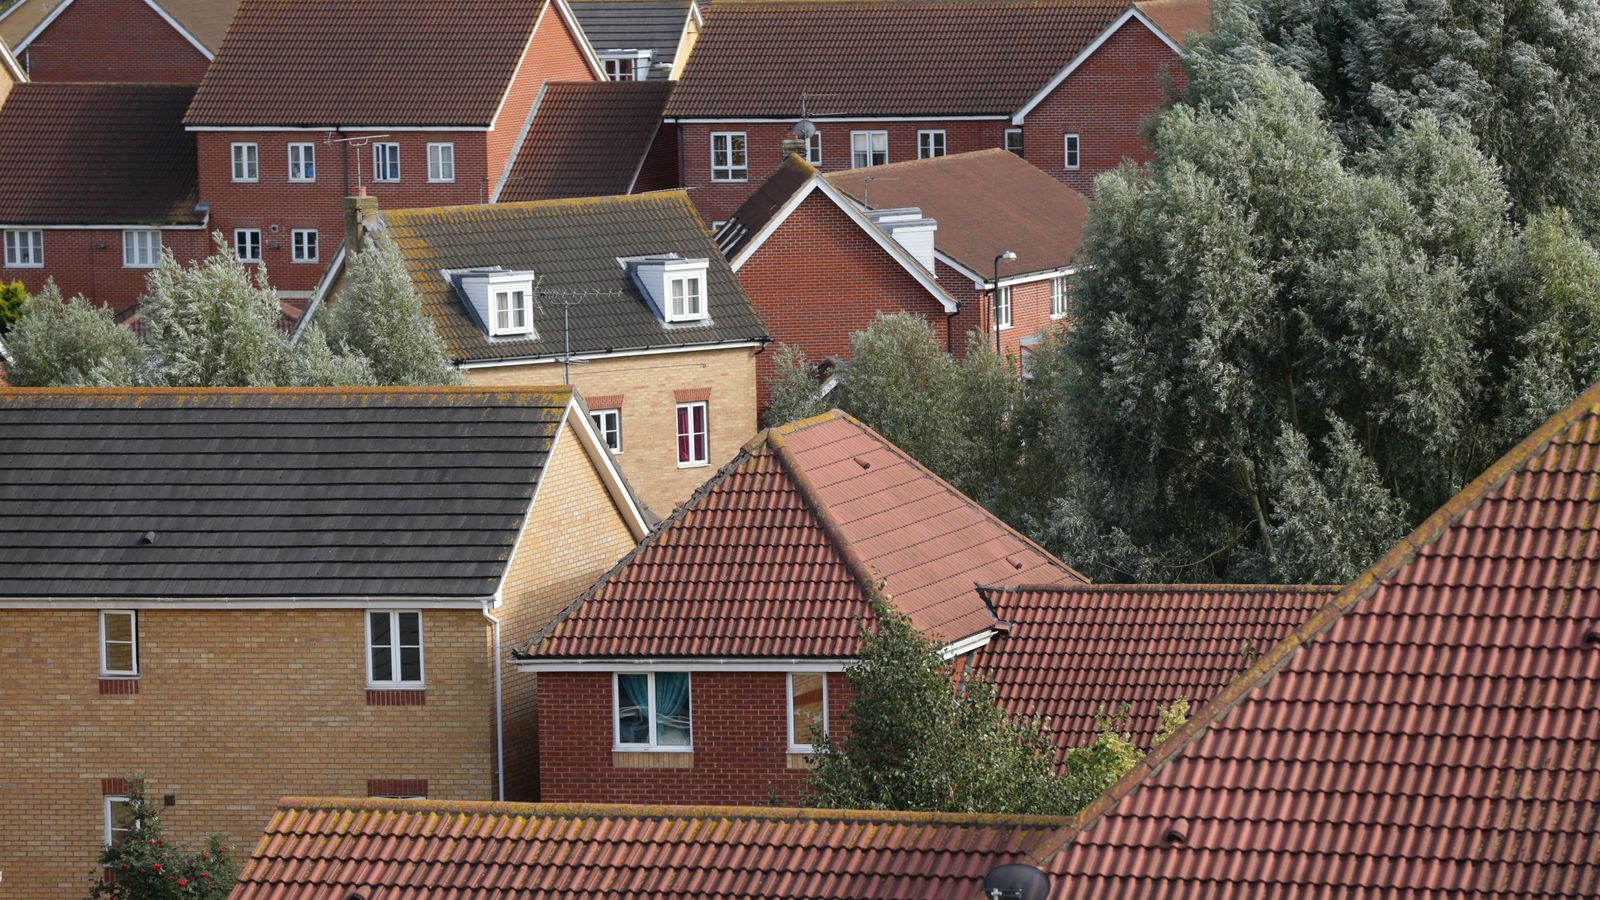 Plans to build more homes in cities to be unveiled amid criticism from developers